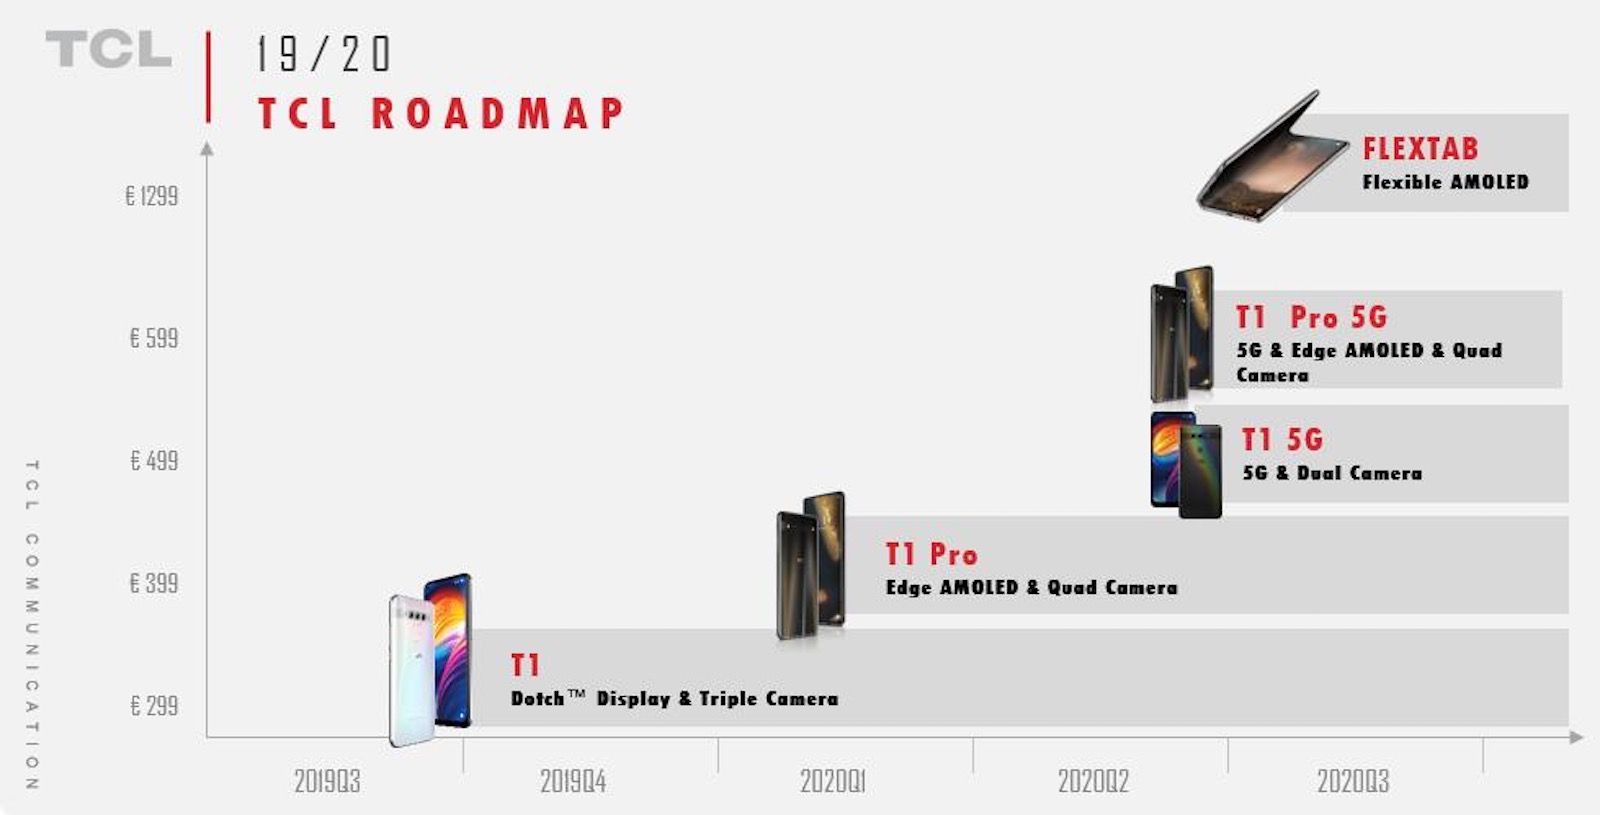 Leaked TCL roadmap reveals first wave of own-brand phones starting with T1 image 3